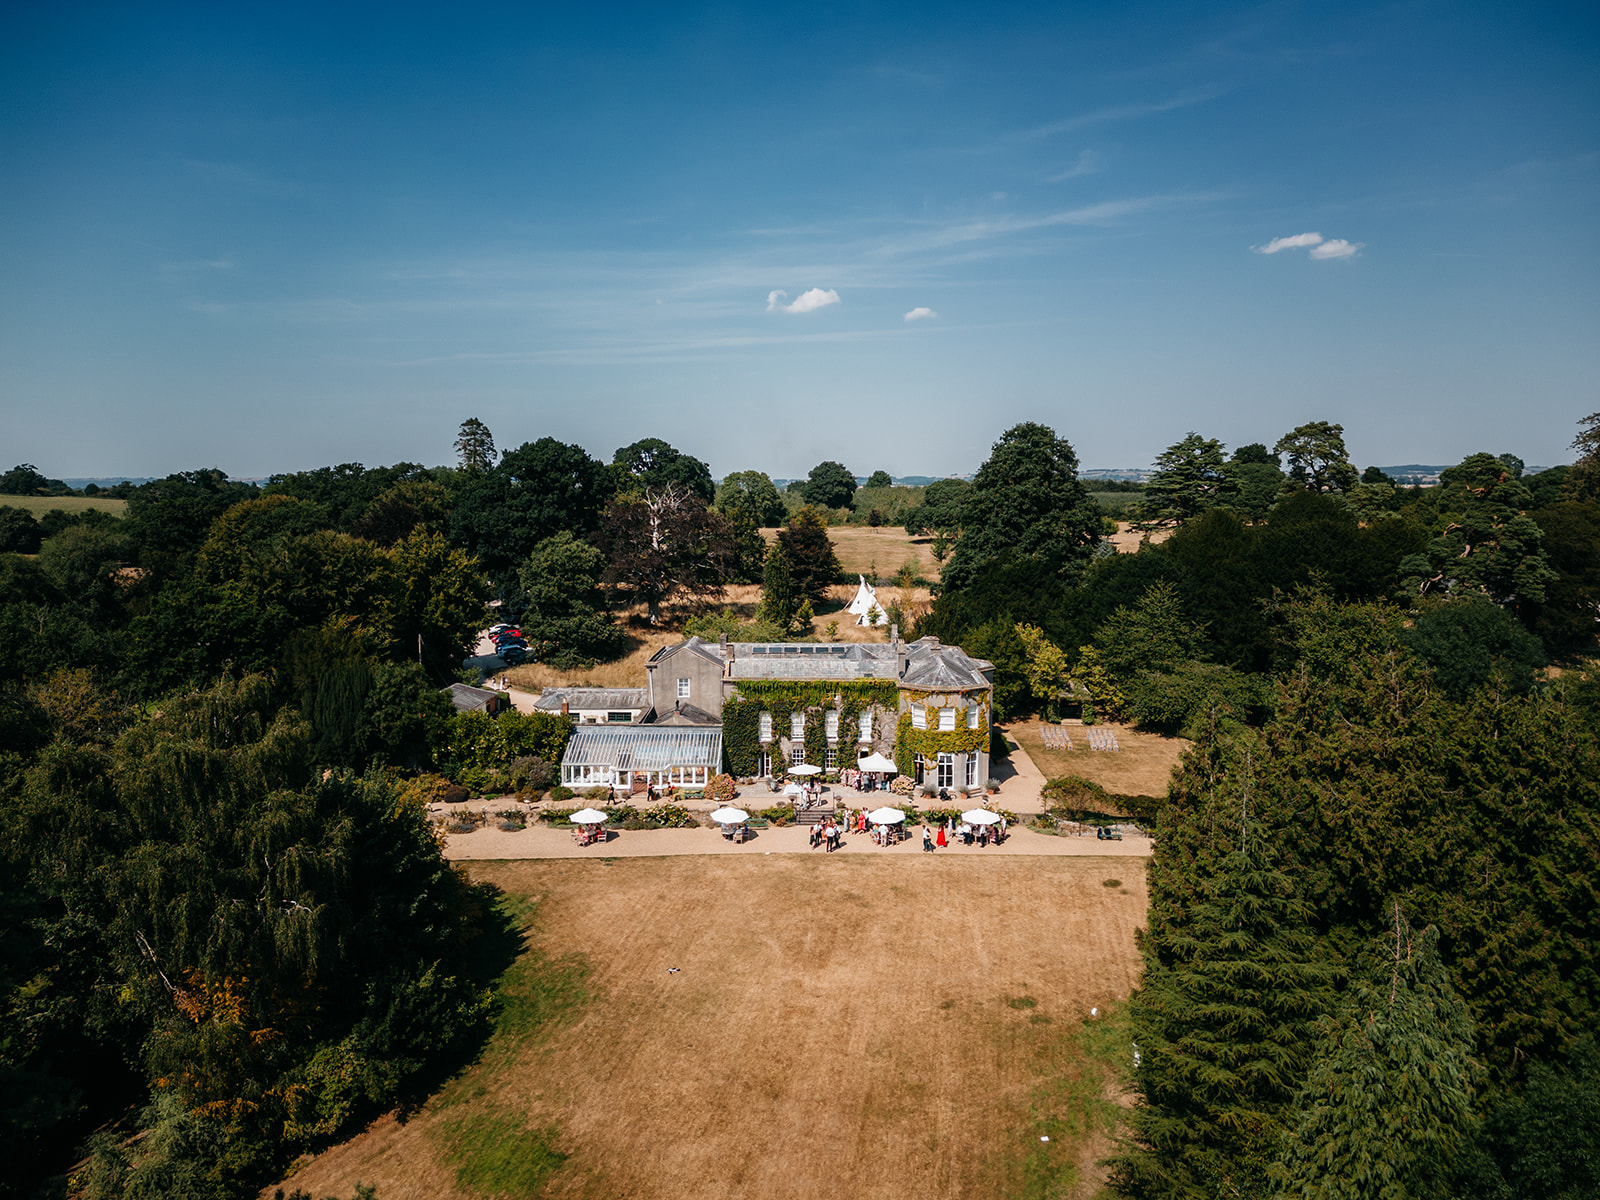 an areal view of the beautiful Glastonbury wedding venue